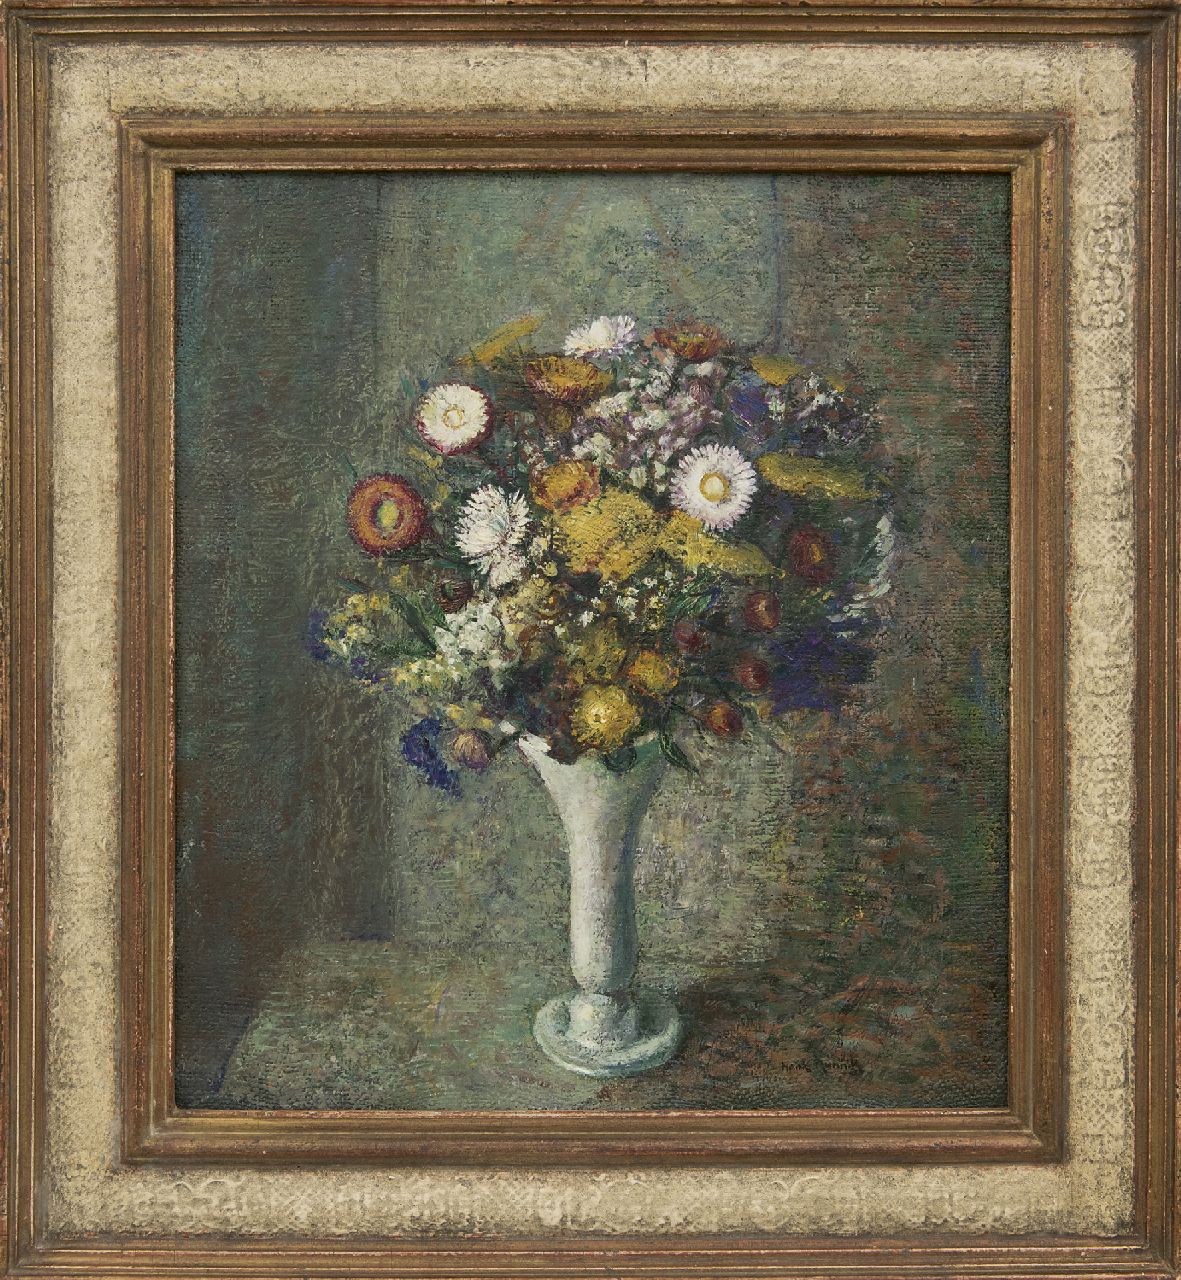 Munnik A.H.  | Andries Hendrik 'Henk' Munnik | Paintings offered for sale | A bouquet of dried flowers, oil on canvas 45.7 x 40.5 cm, signed l.r.